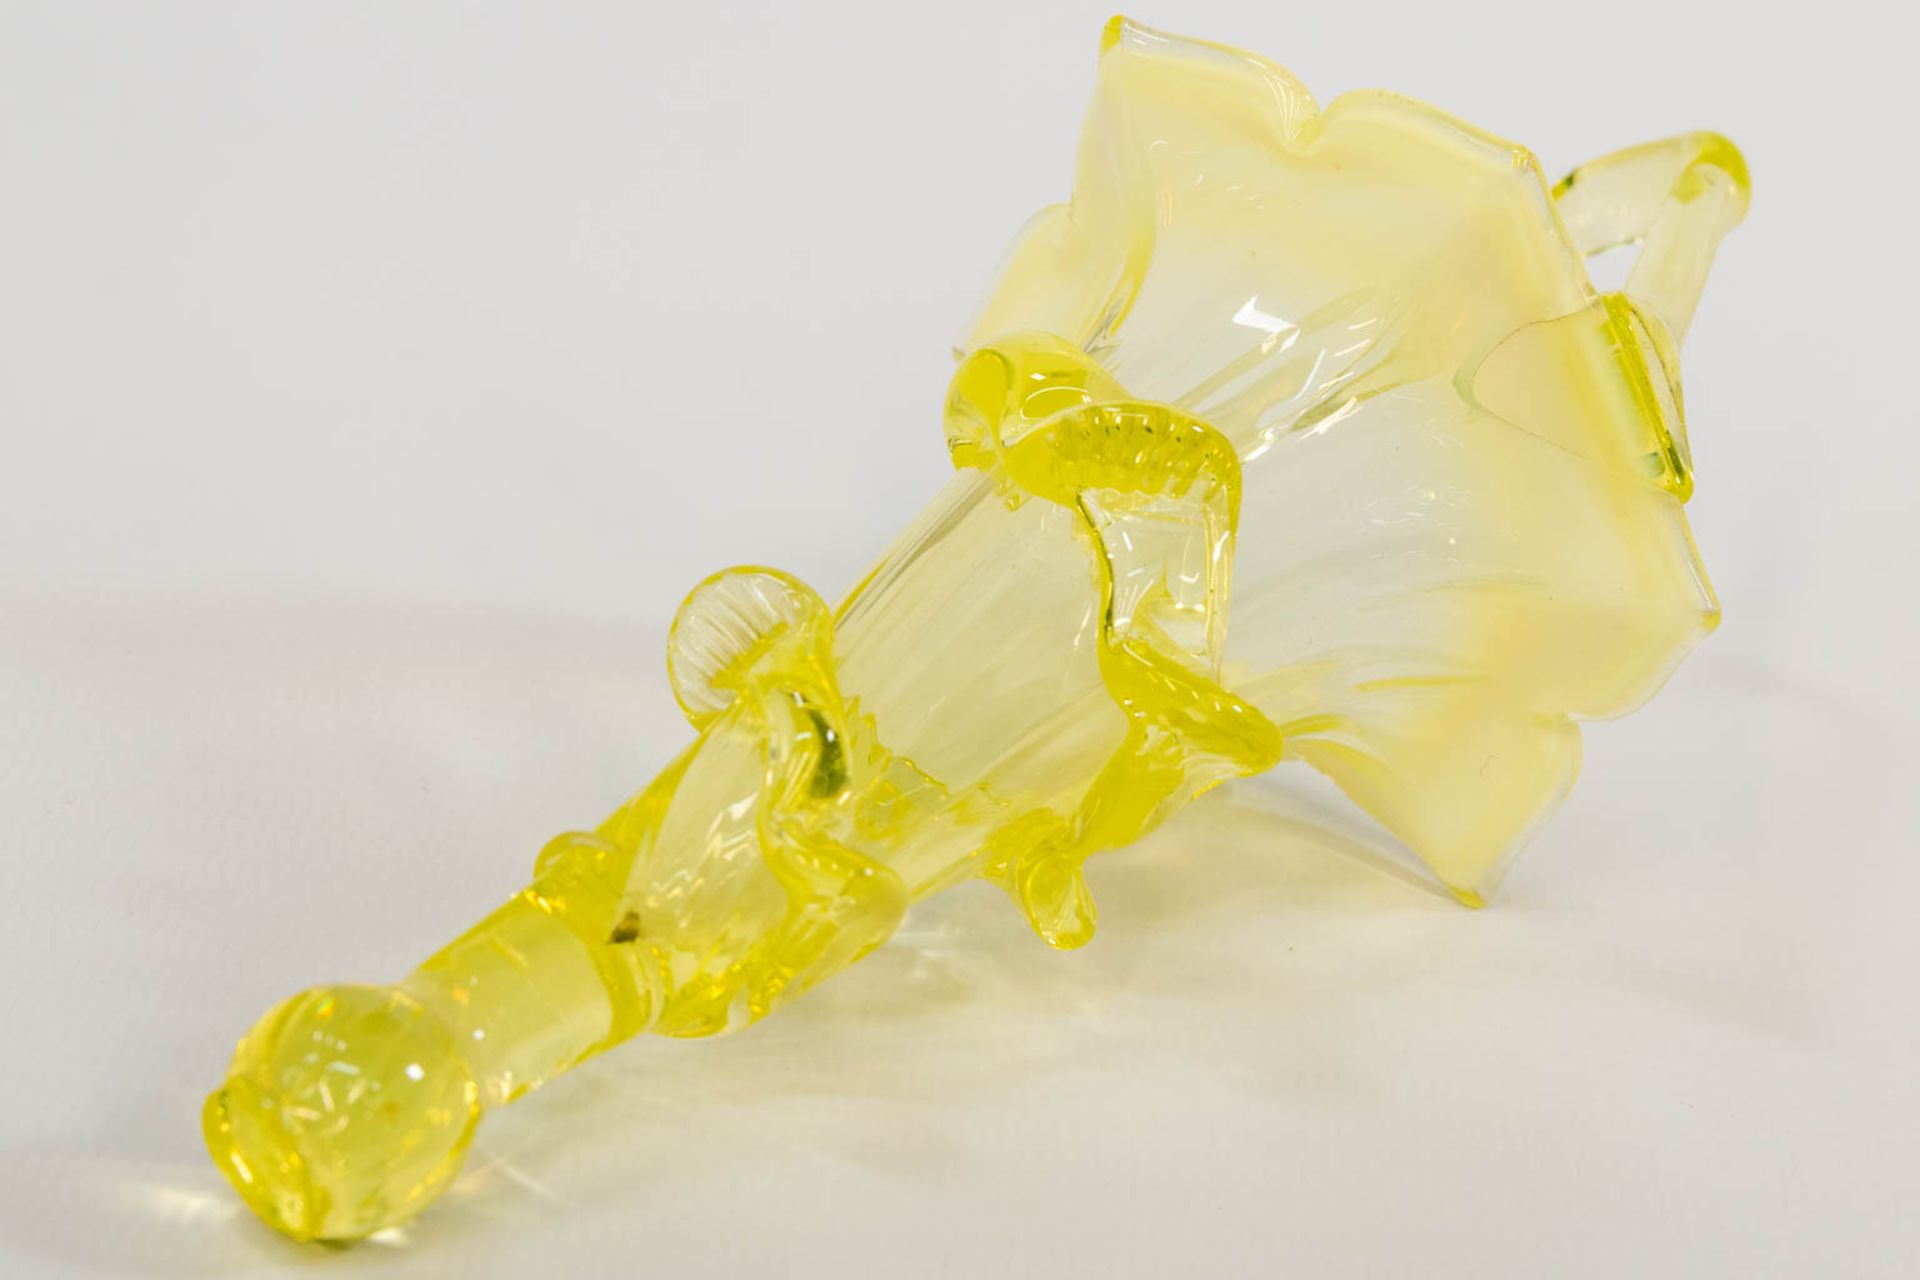 A yellow and clear glass table centrepiece pic-fleur, made in Murano, Italy. (25 x 28 x 45 cm) - Bild 11 aus 15